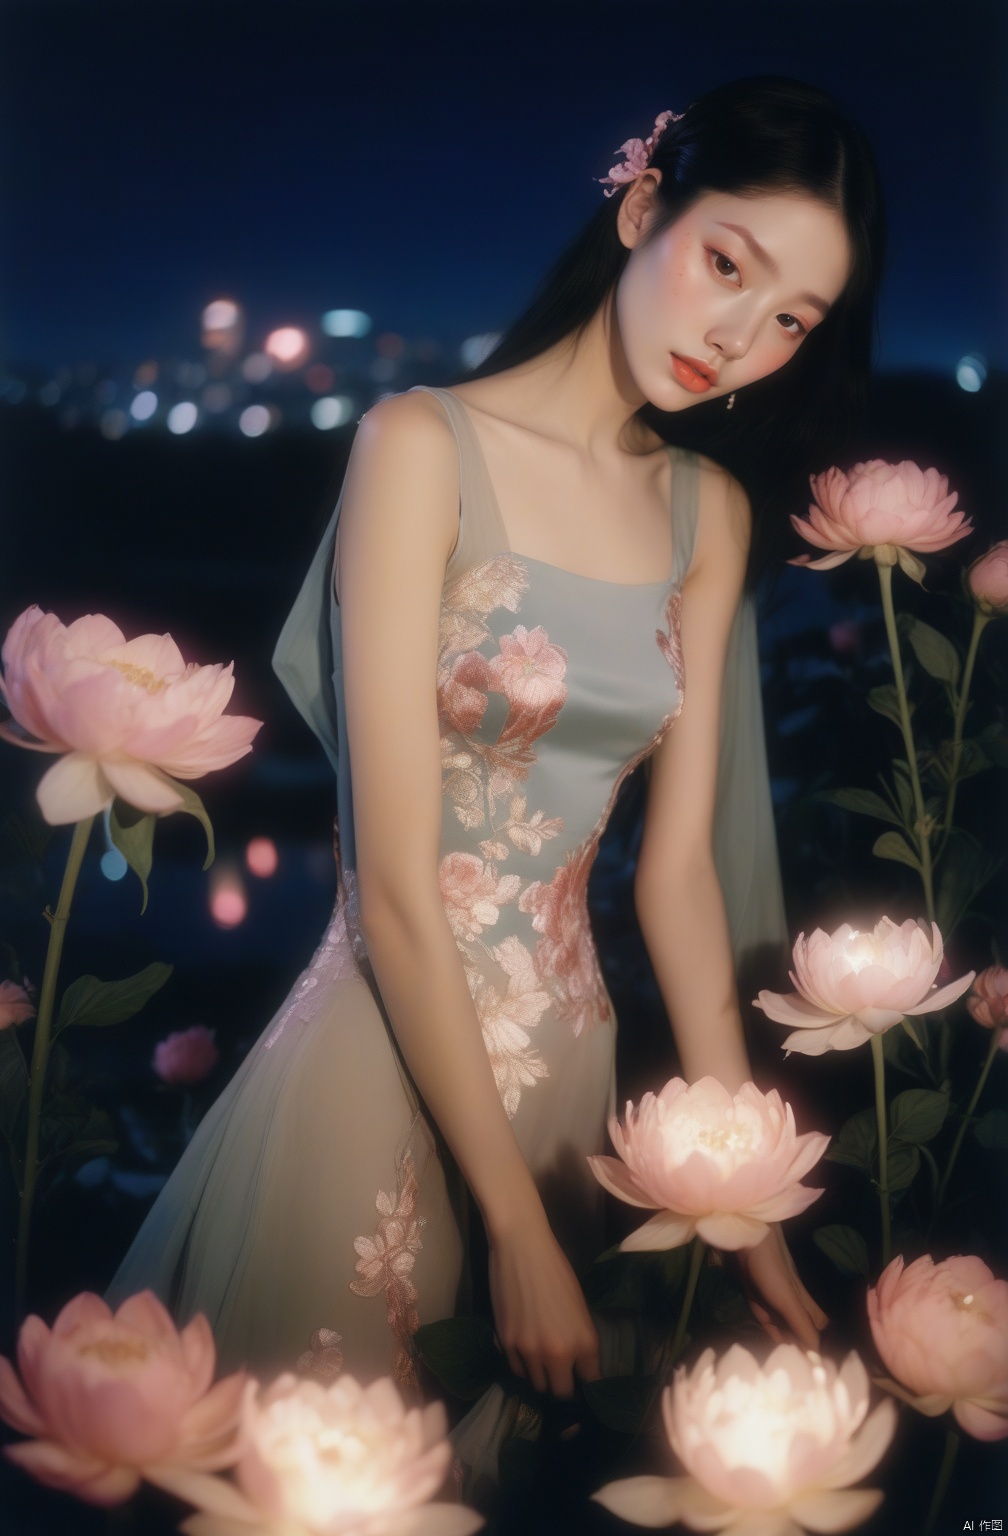 Surrealism, (ultra high res:0.55), woman, skinny,  (asian:0.65),
flowers blooming, Fujifilm Provia 400X, heavy breathing, night view, Surrealism, crystal,
aesthetic, :3, [luxury fabrics|armor|smock], Exquisite,
delicate, elaborate, exquisite, elegant, graceful
